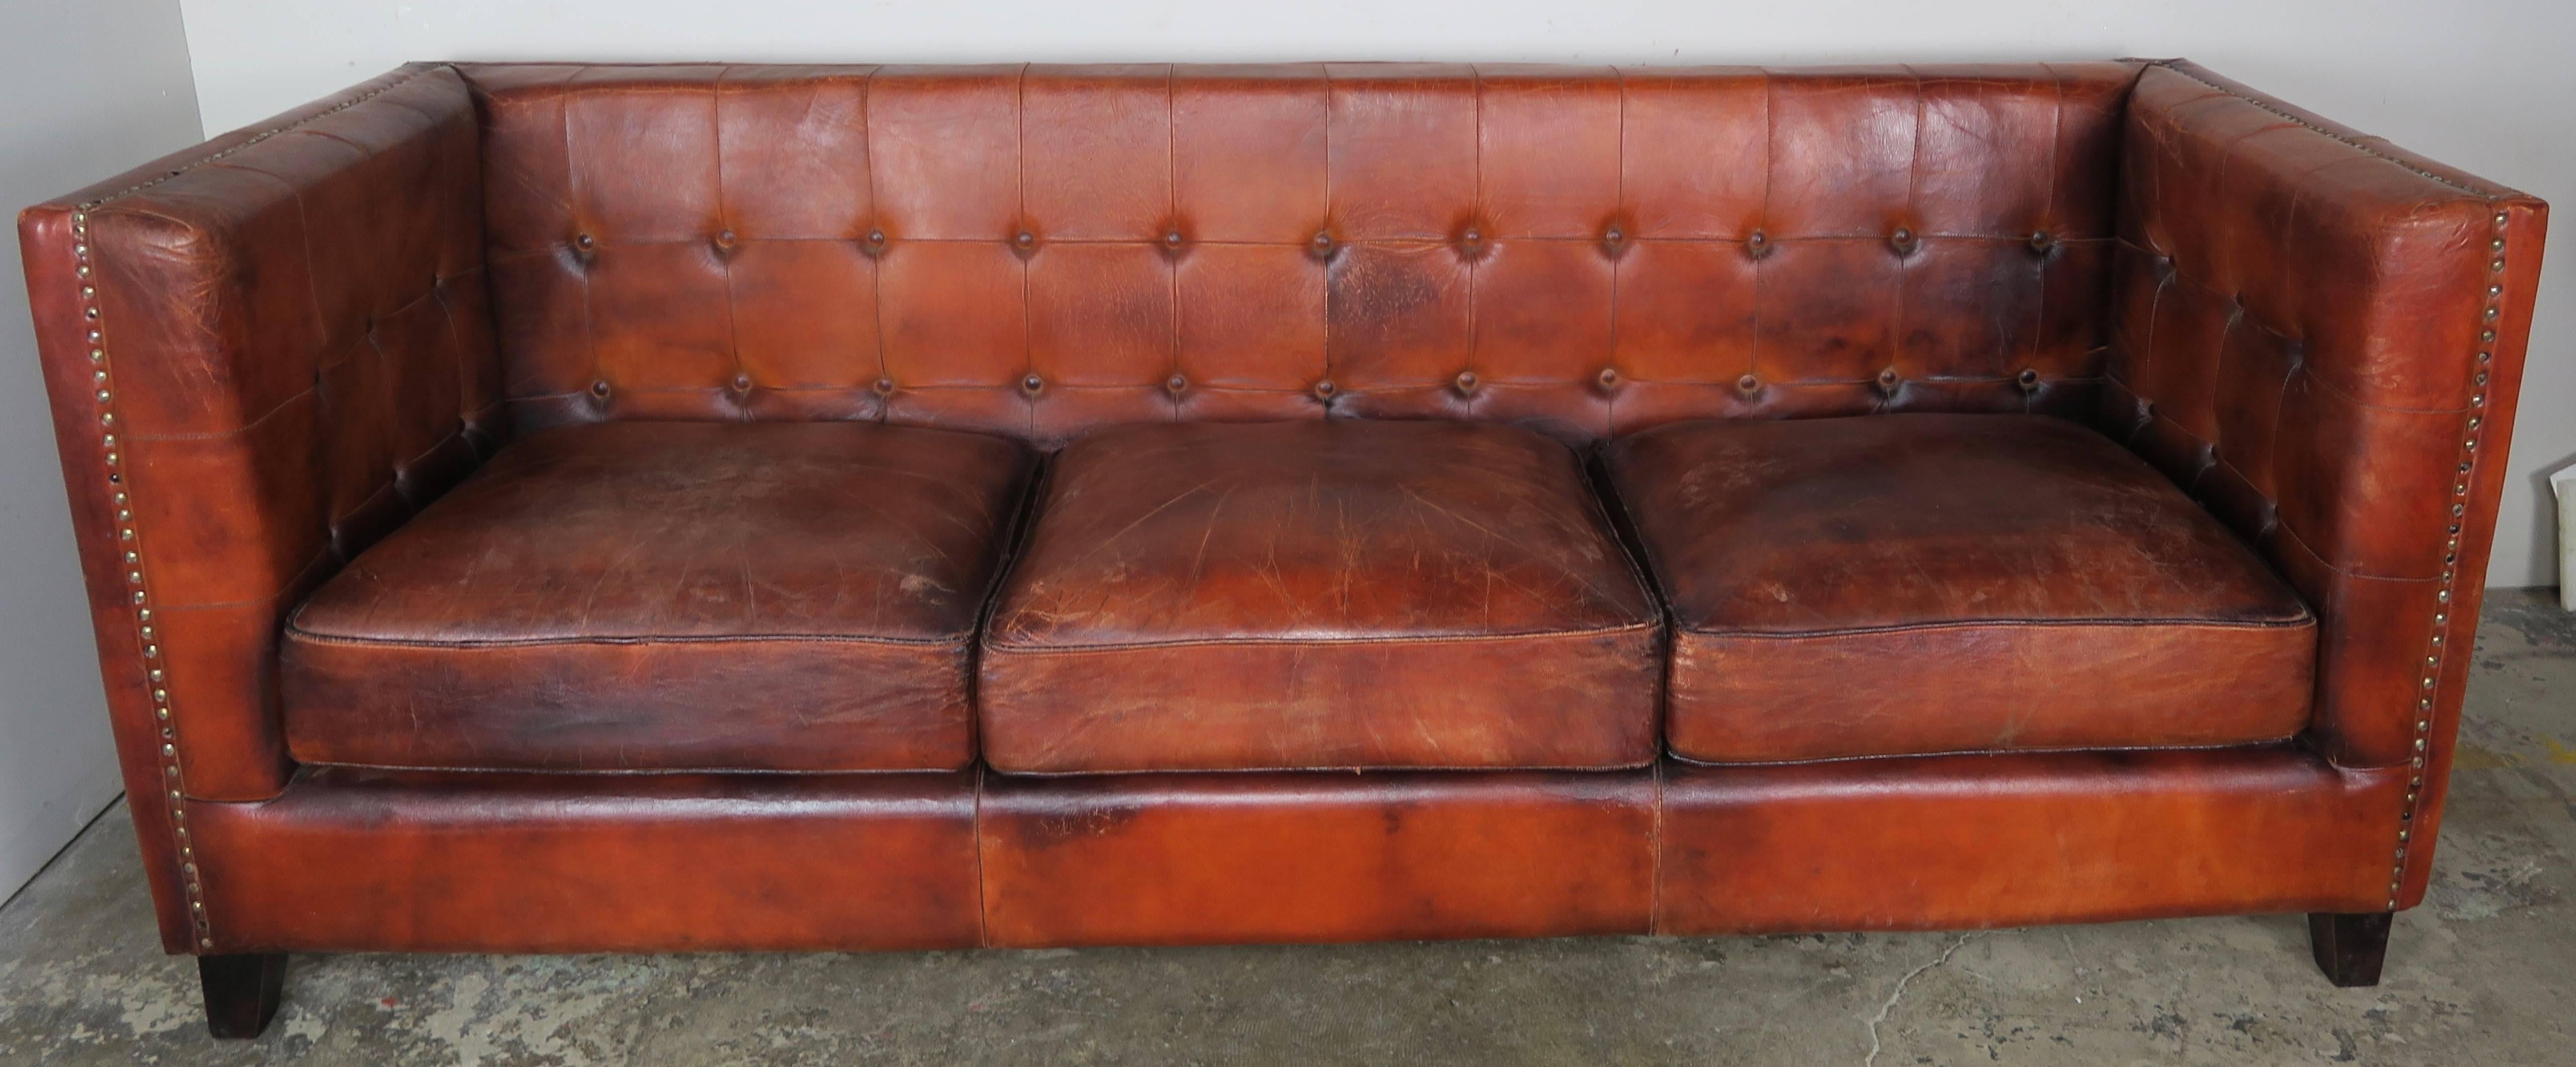 Italian tobacco colored leather sofa with three cushions. The sofa stands on four ebony stained feet with tufted back and sides. Brass nailhead trim detail around the back and down both arms of the sofa. The sofa is in all original condition with